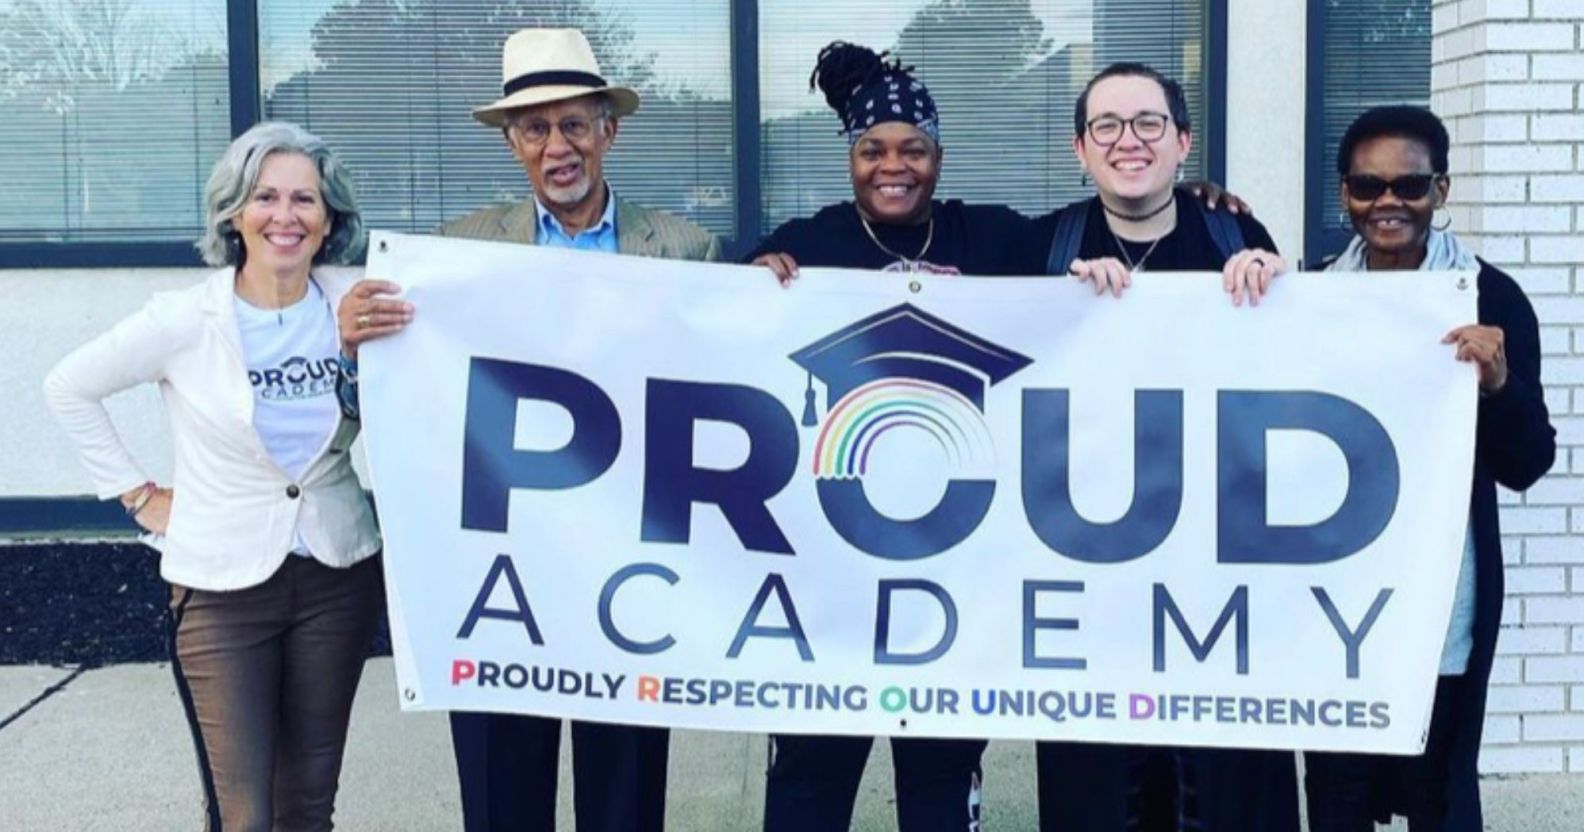 A photo showing lesbian teacher Patricia Nicolari (left), with members of the PROUD Academy board holding a sign saying "PROUD Academy"